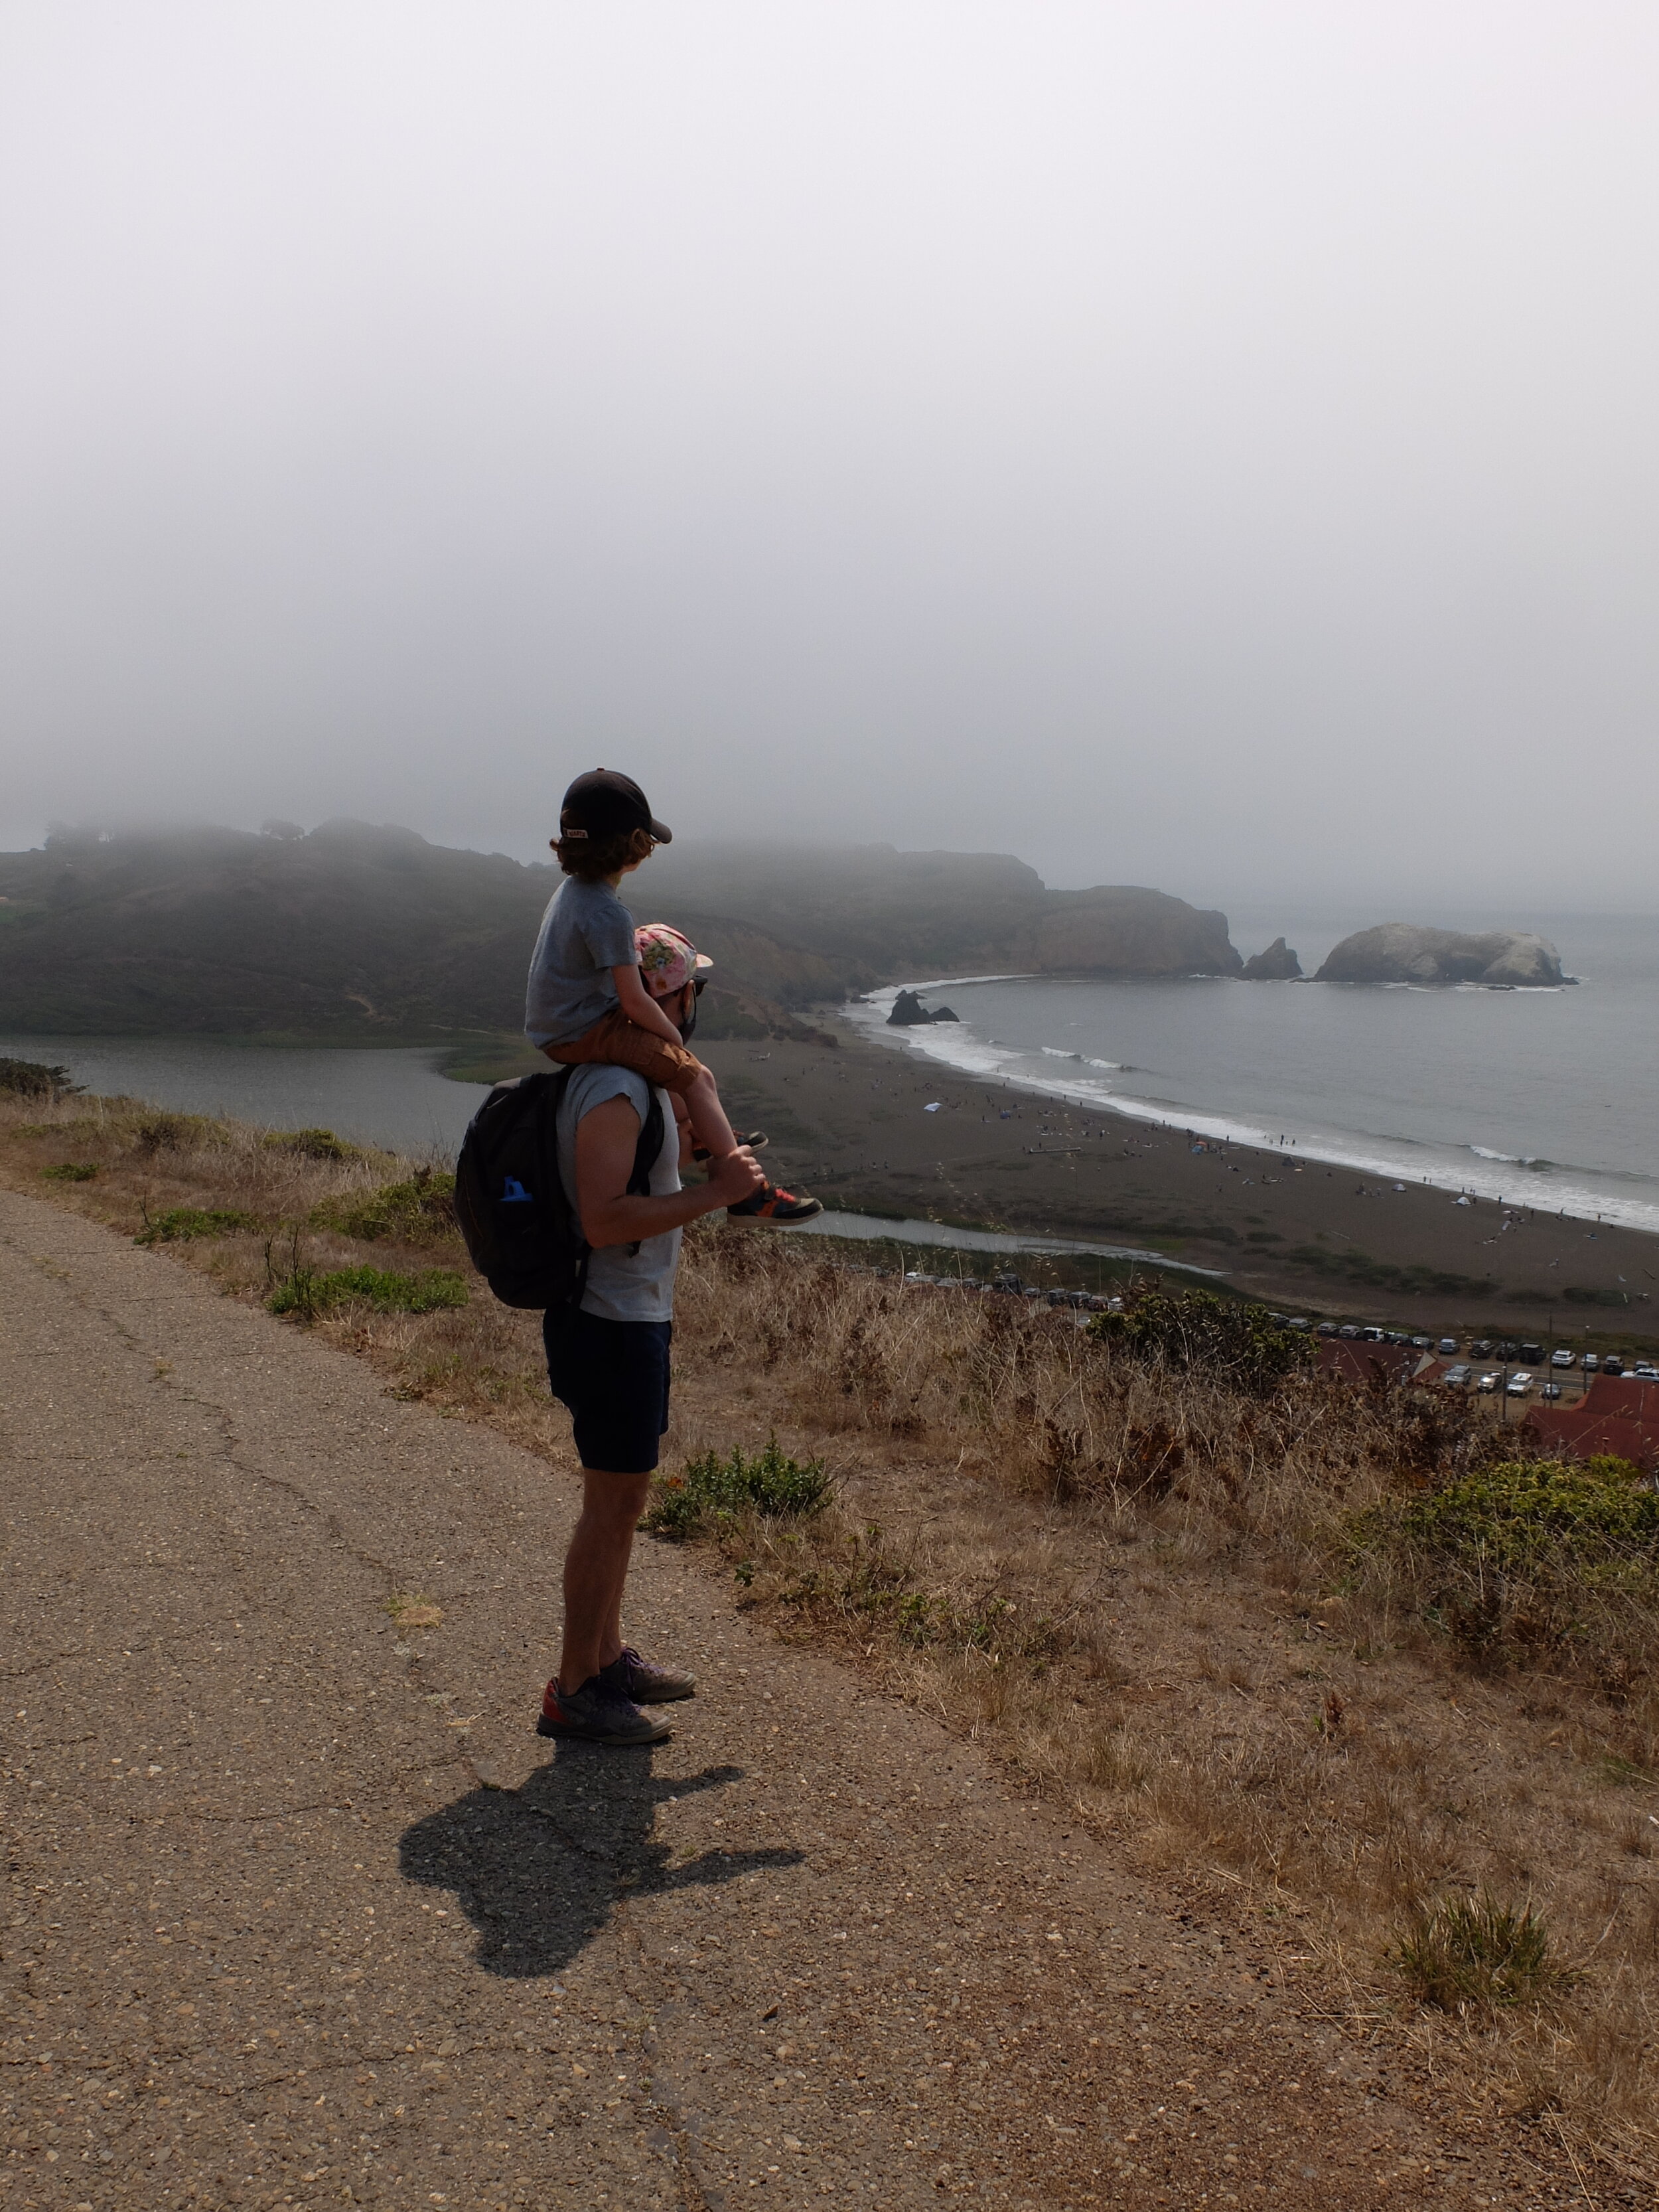 We escaped to hiking in fresh air at Ft. Cronkite GGNRA &amp; Rodeo Beach.